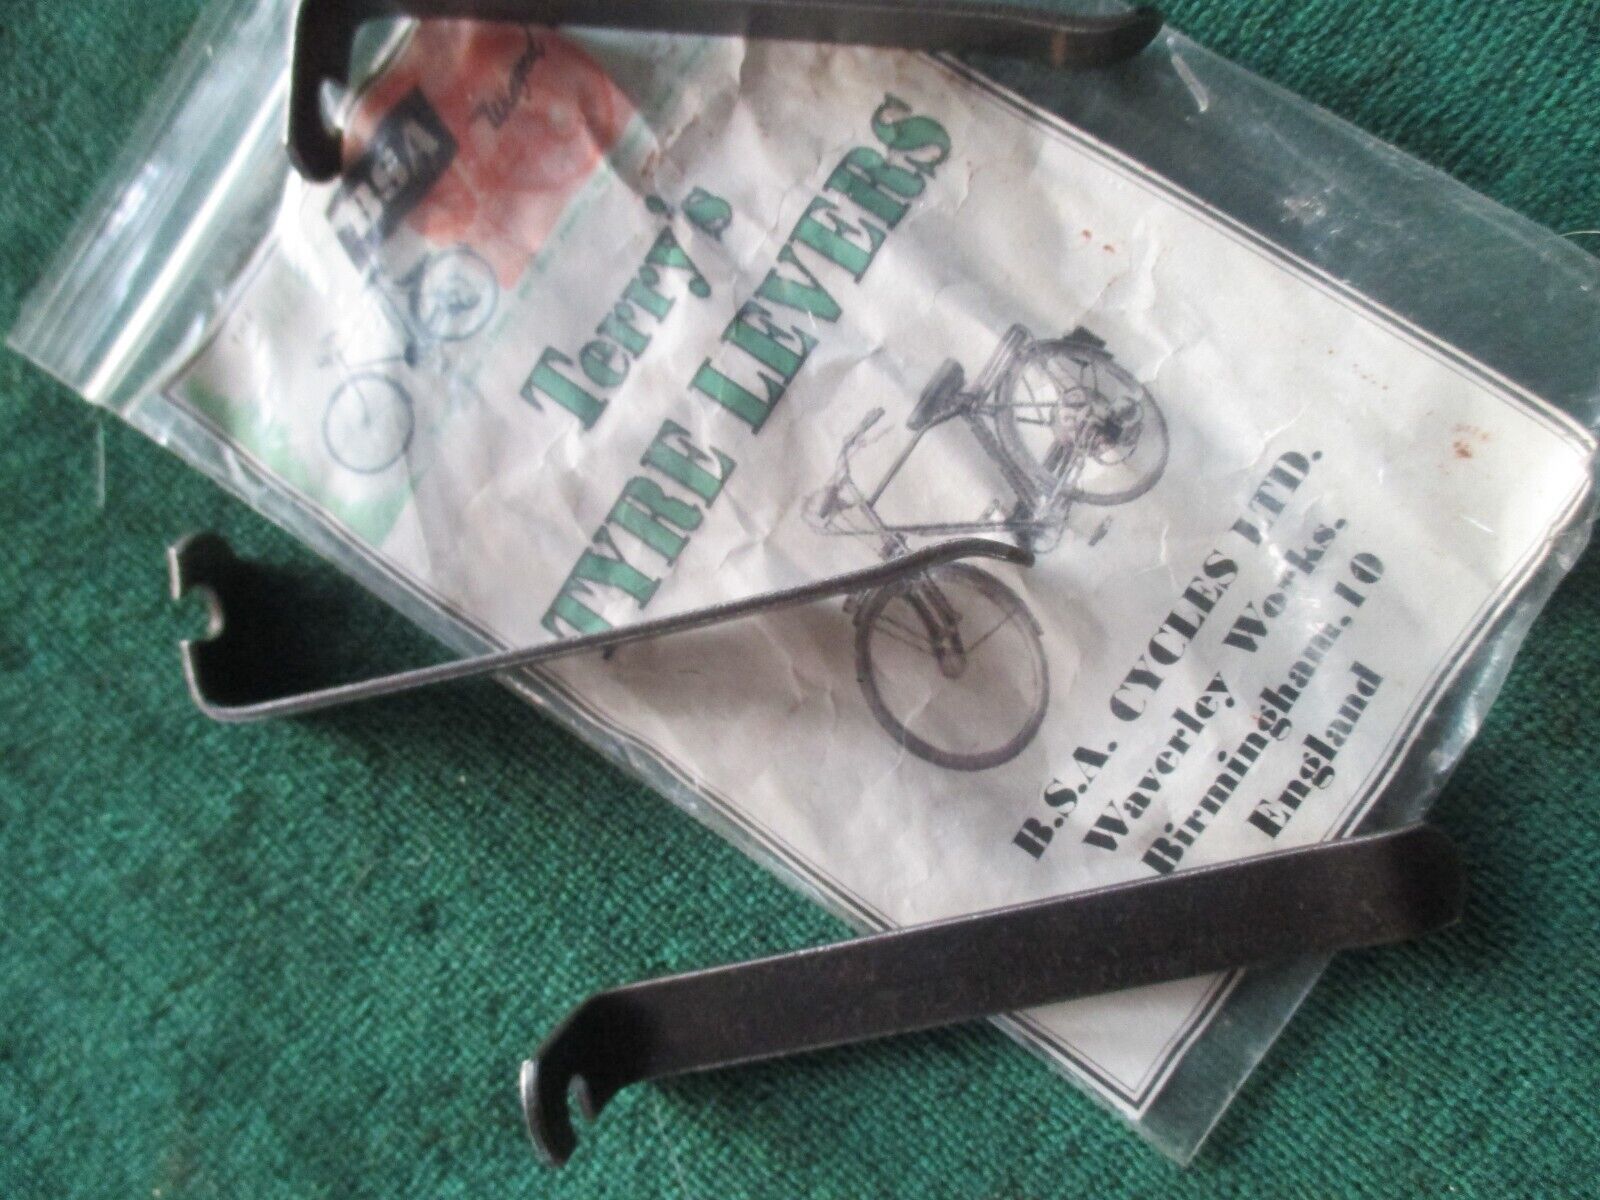 THREE BSA WINGED WHEEL FLAT TYRE LEVERS BY TERRYS - NEW OLD STOCK